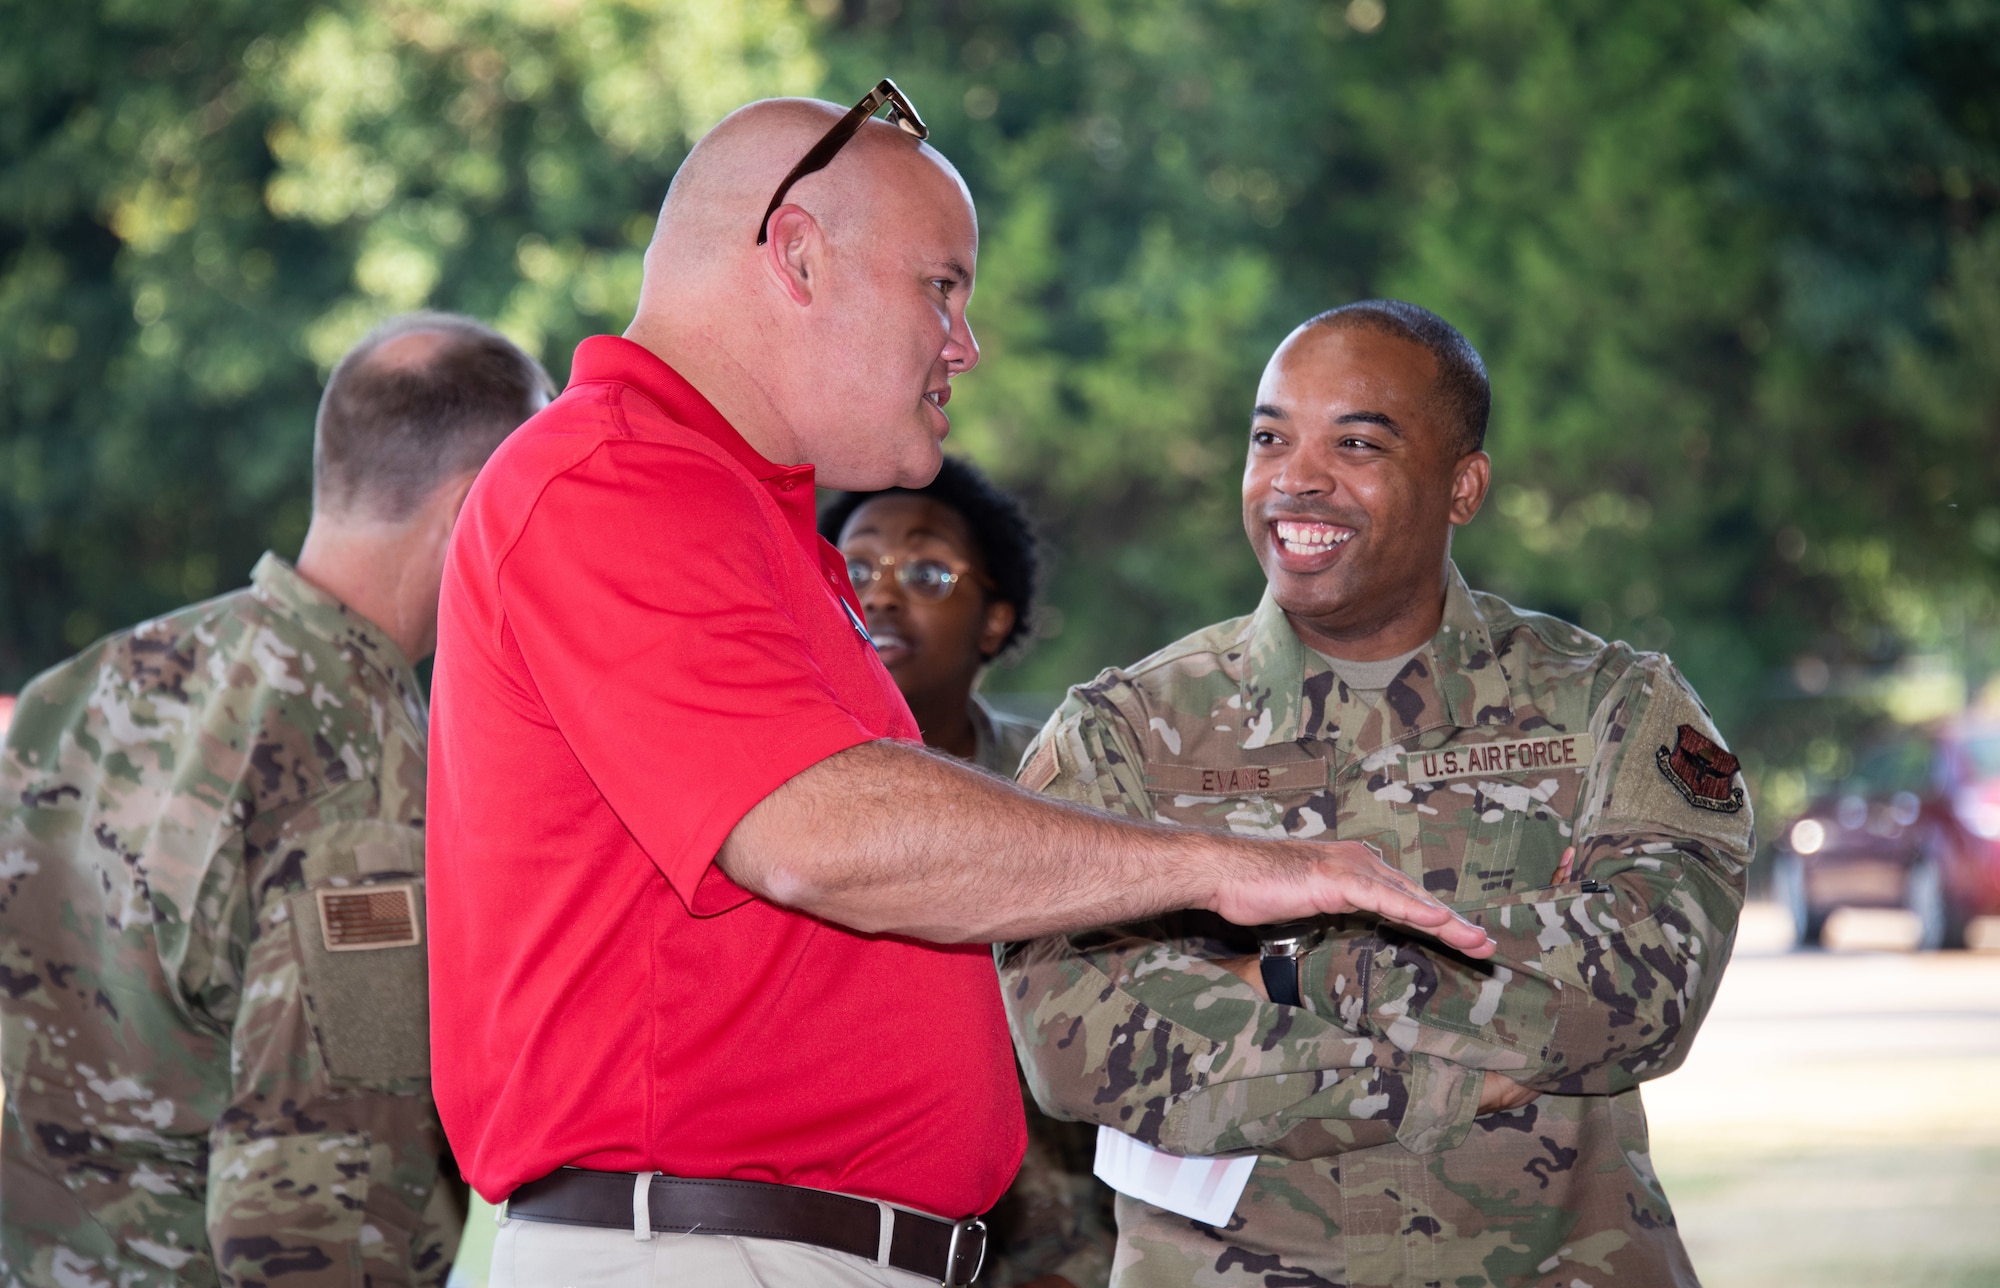 Senior Master Sgt. Thomas E. Case speaks with a fellow Airman, May 28, 2019, on Maxwell Air Force Base, Alabama. Case, who currently serves as a squadron superintendent with Pacific Air Command, was selected to be a member of the 2019 Eagles because of his valor and gallantry in combat. He is one of three Airmen in U.S. Air Force history to twice receive the Silver Star, the nation’s third highest award, which he received supporting ground force operations in Iraq in 2003 and in Afghanistan in 2009.